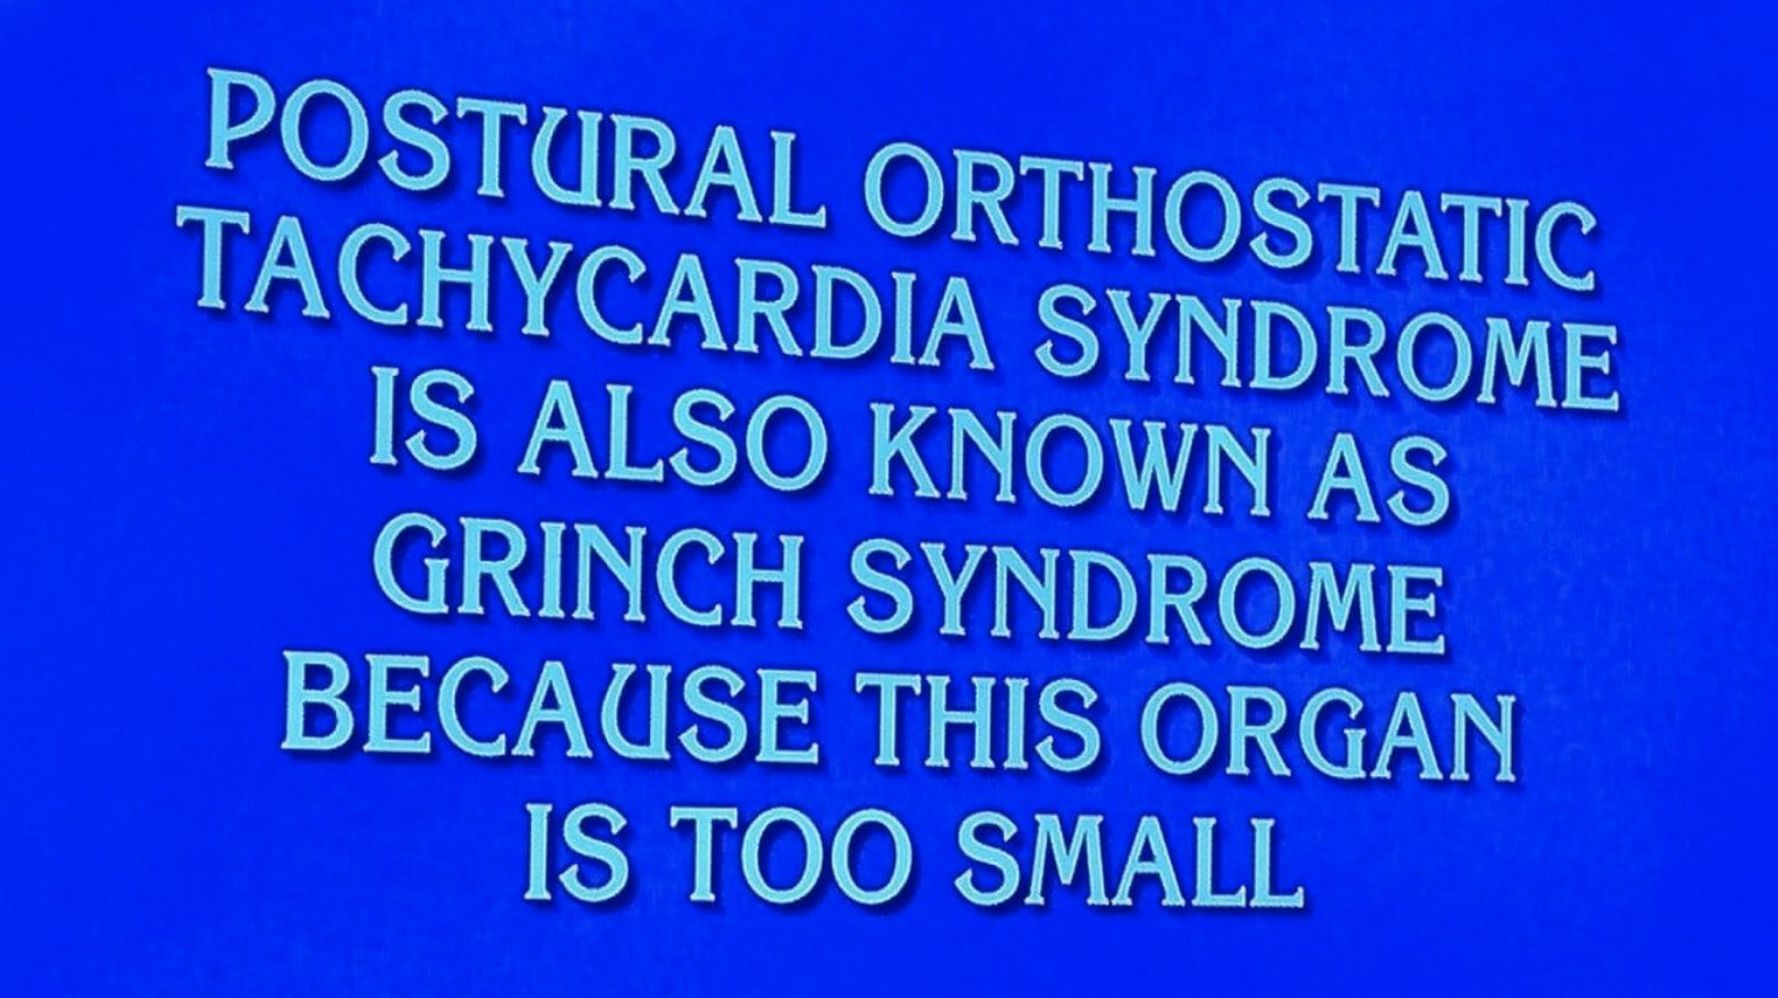 'Jeopardy!' Apologizes For Using 'Inaccurate' Medical Term After Viewer Backlash